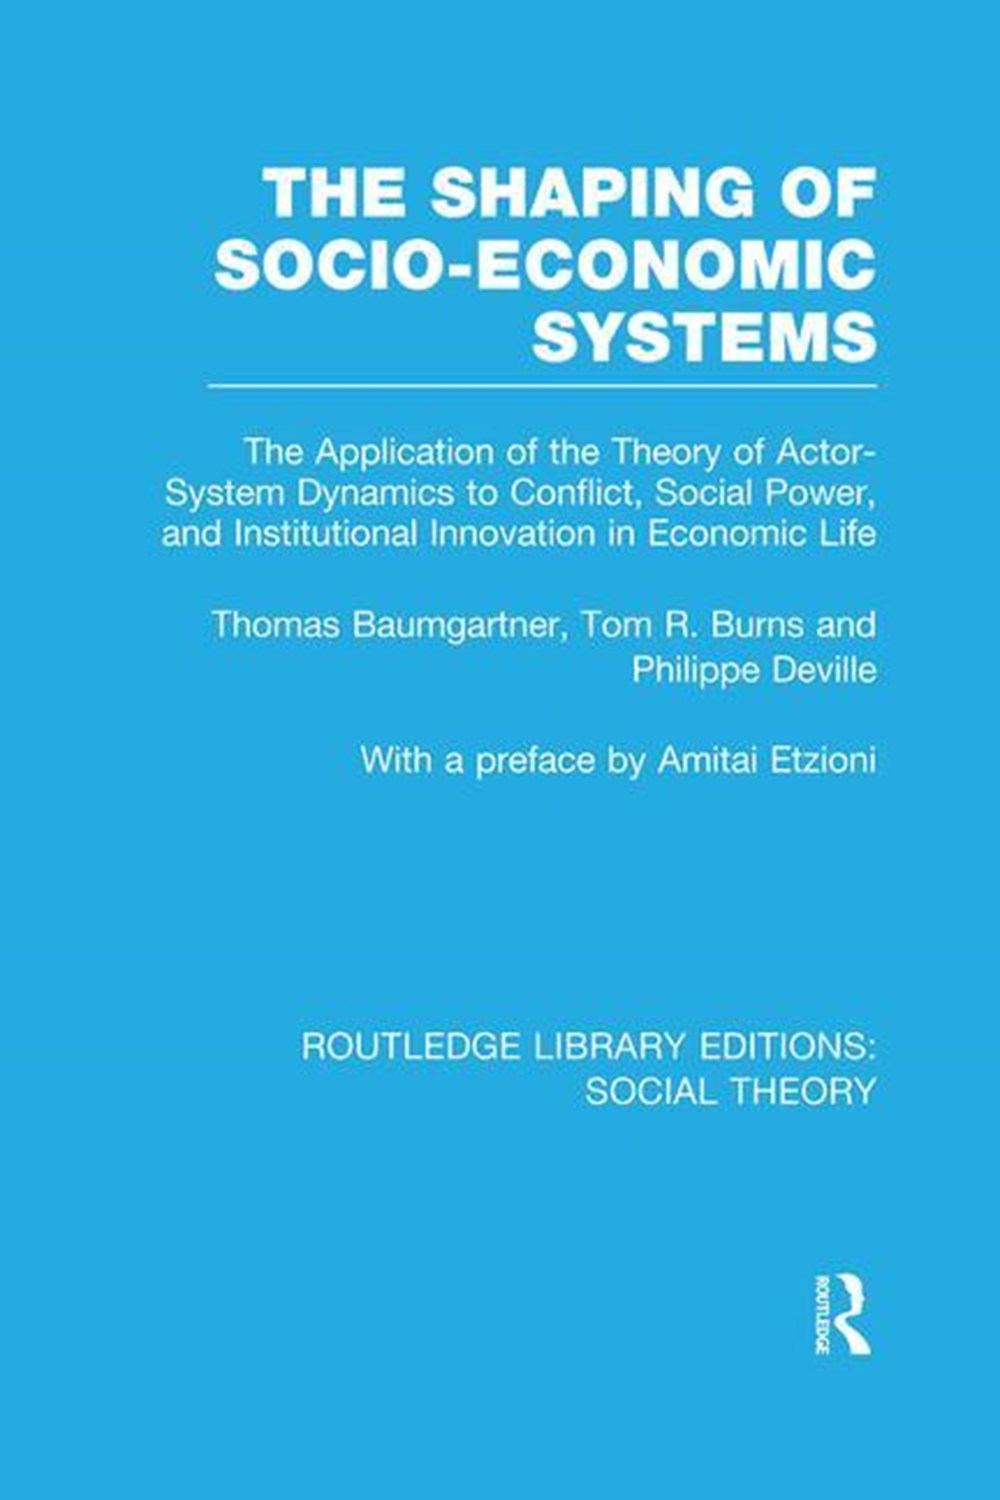 Shaping of Socio-Economic Systems: The application of the theory of actor-system dynamics to conflic